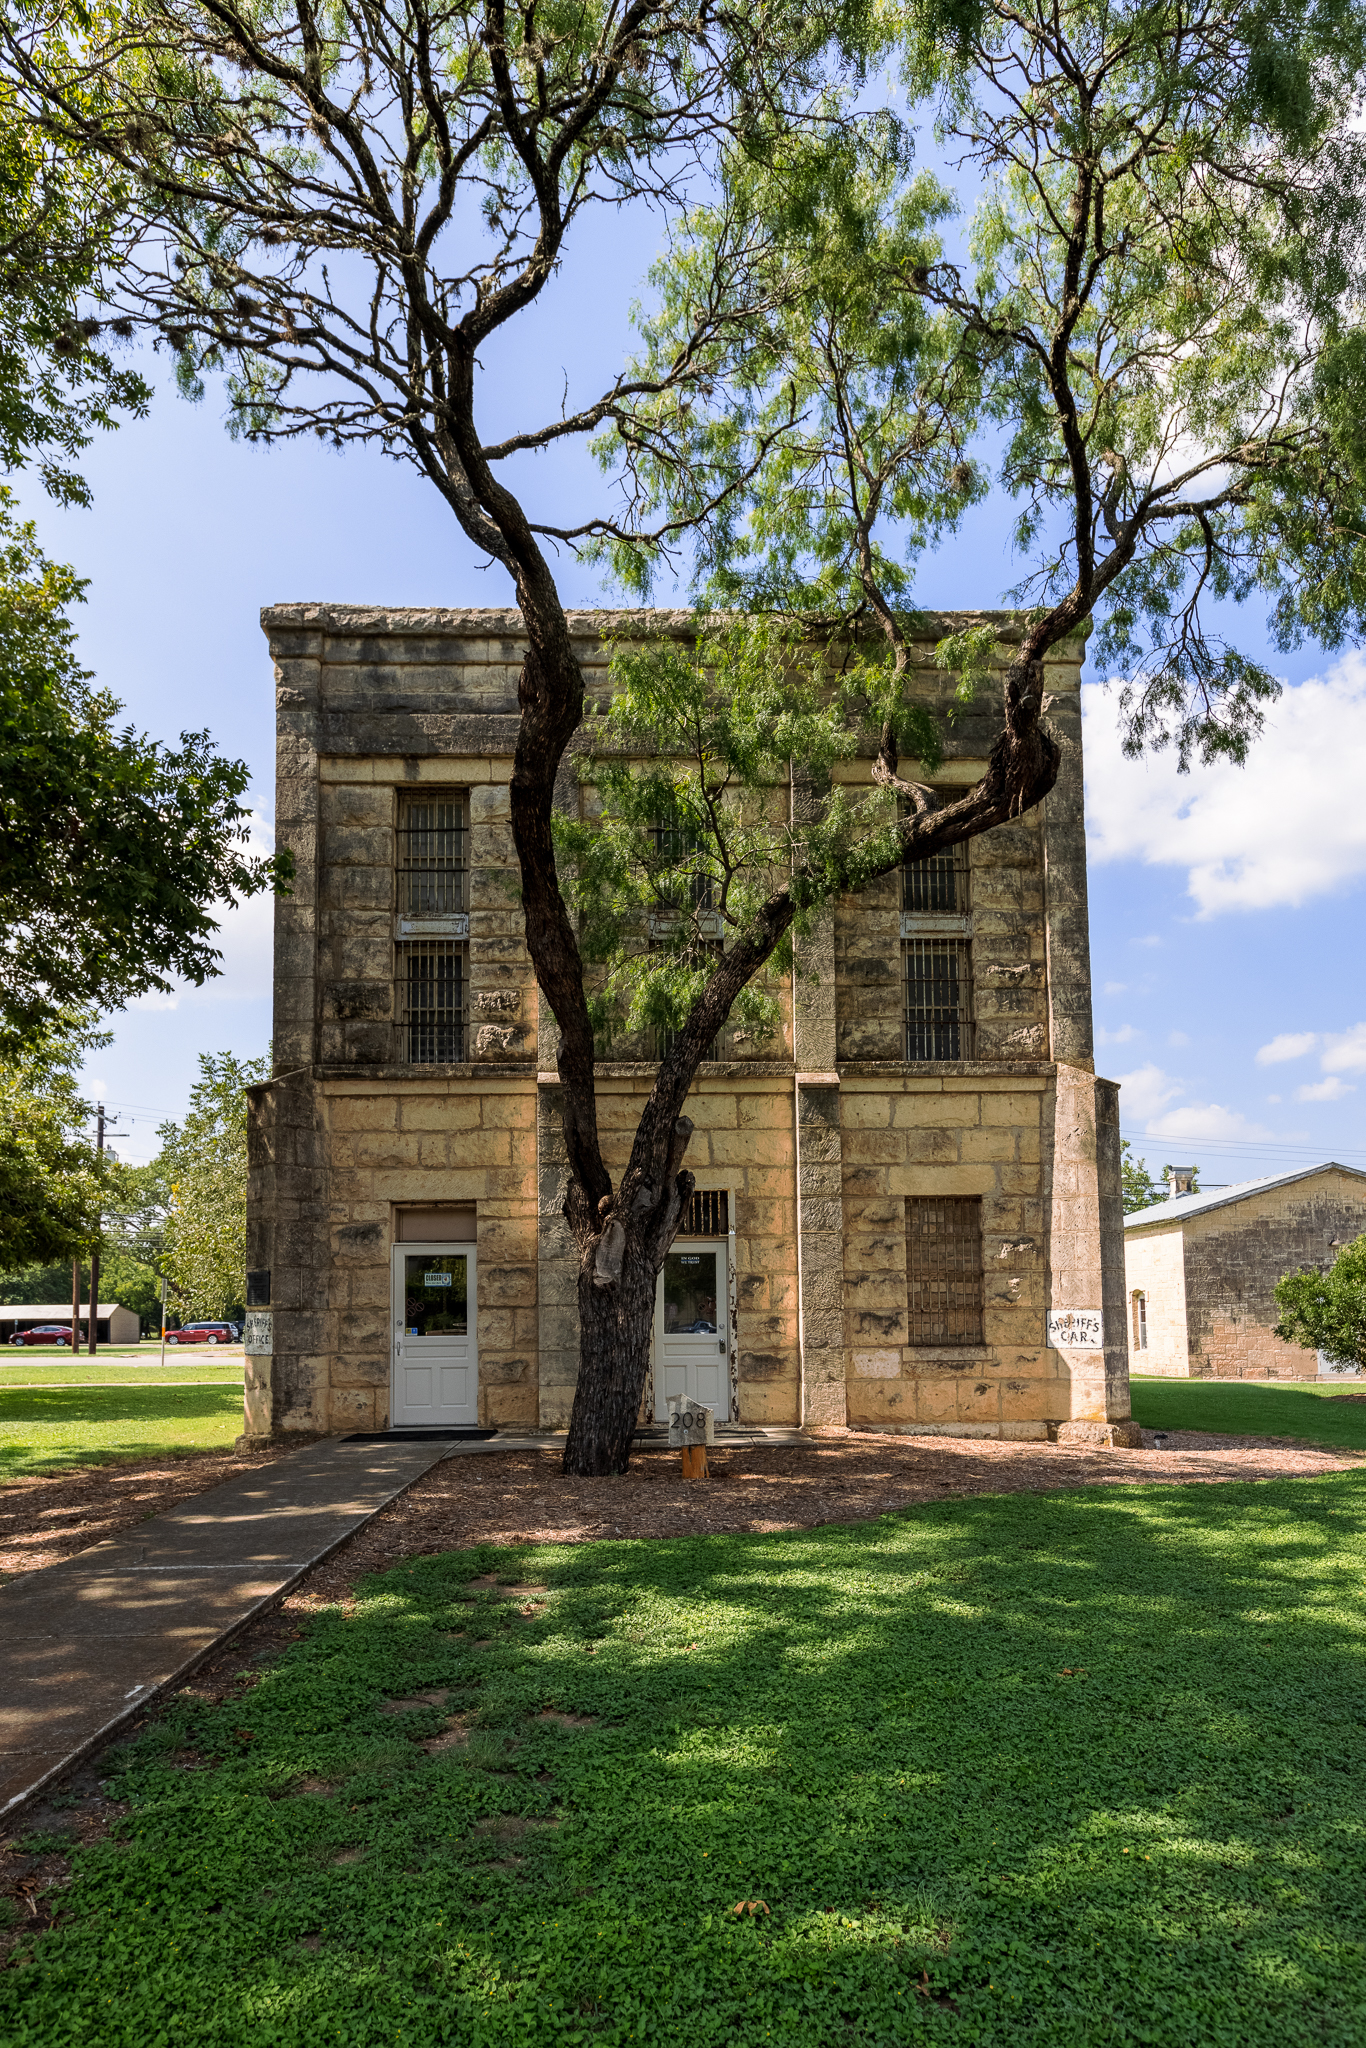 The exterior of the Old Jail Museum in Boerne, TX.